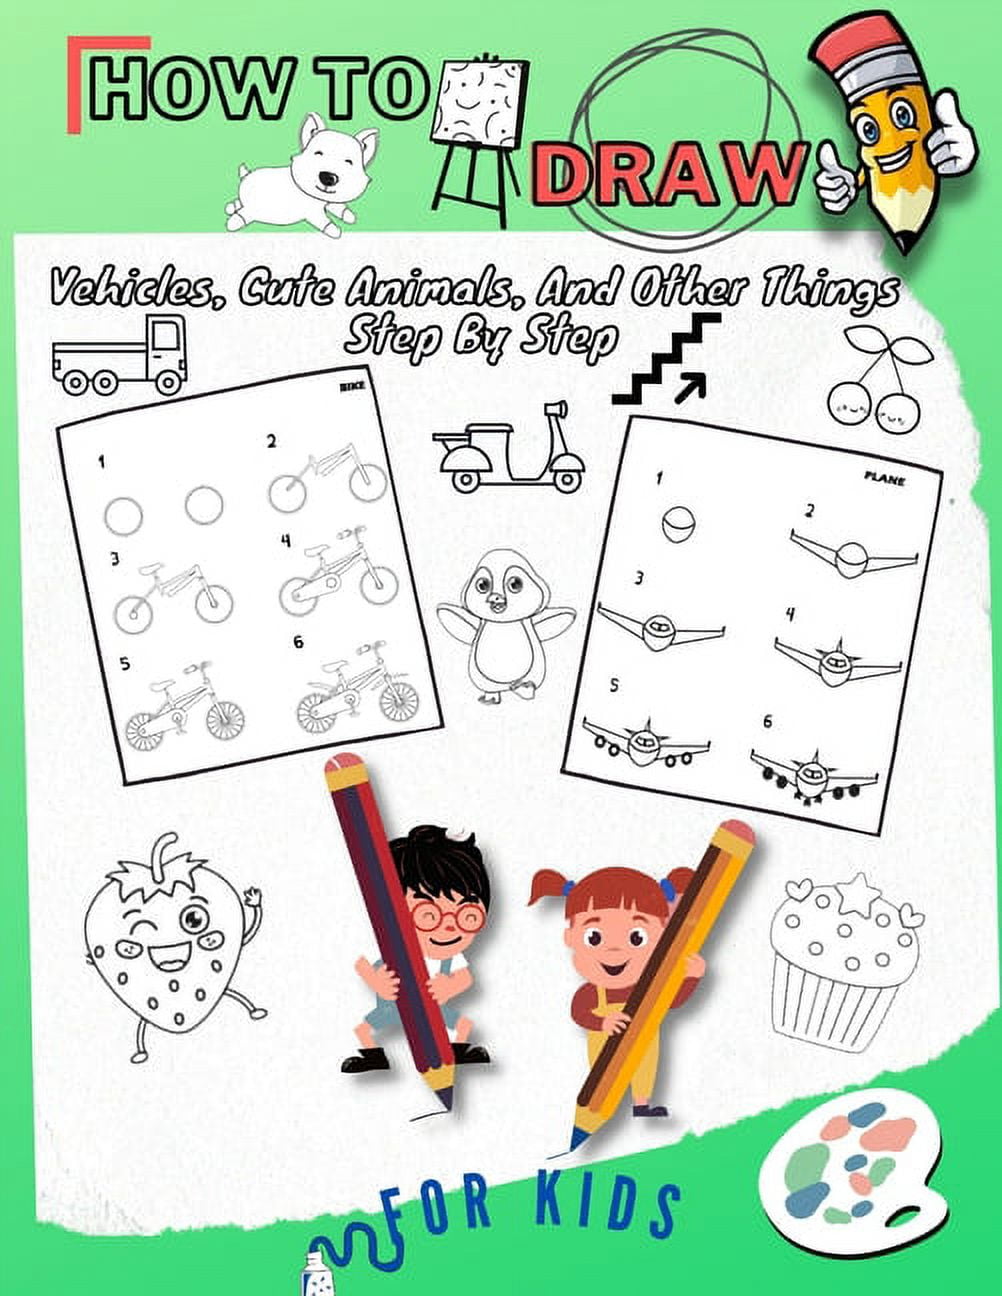 Learn How to Draw 1000 Things - The Big Drawing Book for Kids with Step by Step Instructions: Draw Cute Things Like Animals, People, Cars and